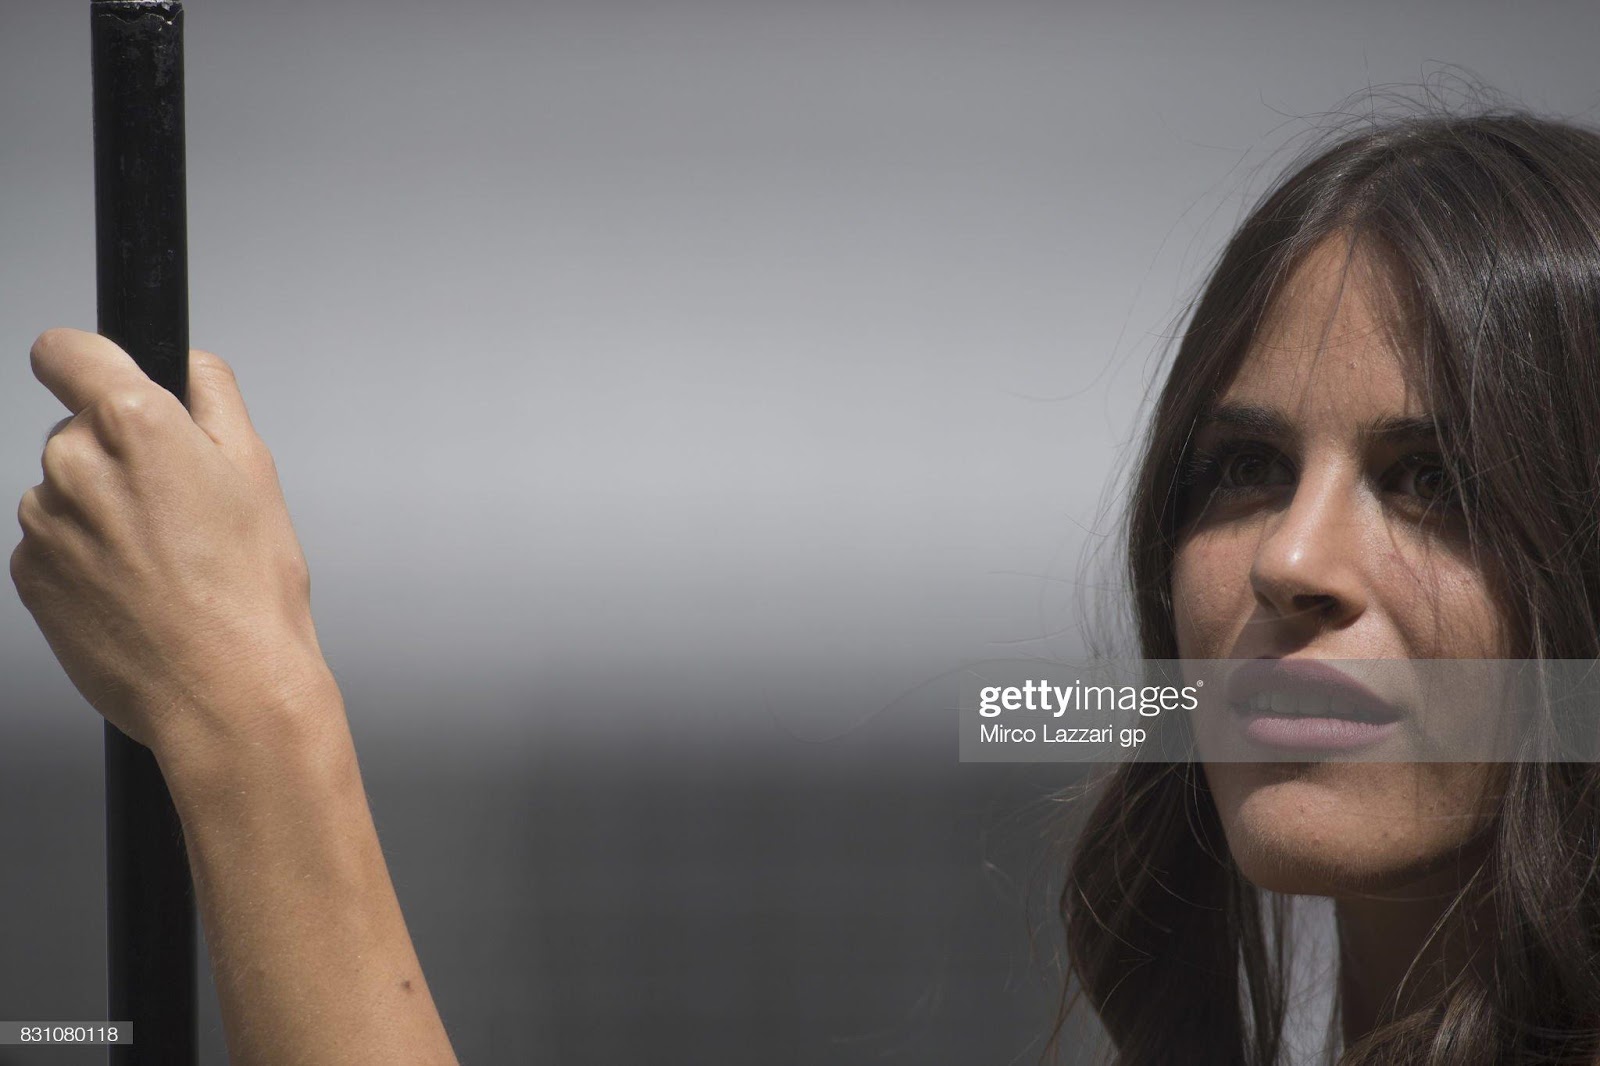 D:\Documenti\posts\posts\Women and motorsport\foto\Getty e altre\grid-girl-poses-on-the-grid-during-the-moto2-race-during-the-motogp-picture-id831080118.jpg